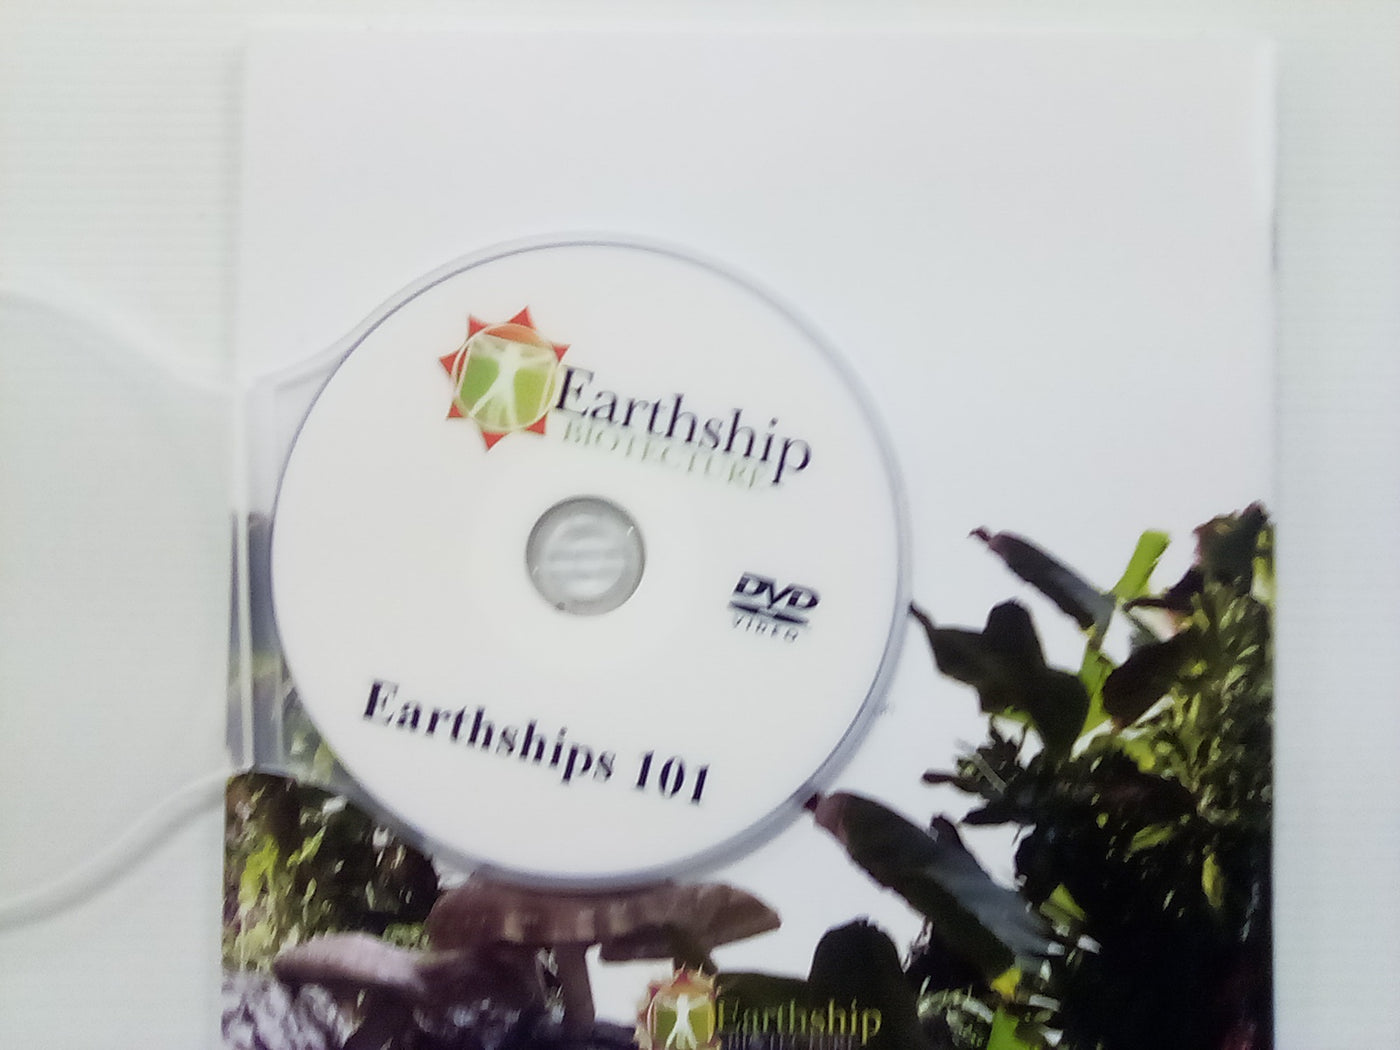 Earthship Biotecture (Includes DVD) by Michael Reynolds